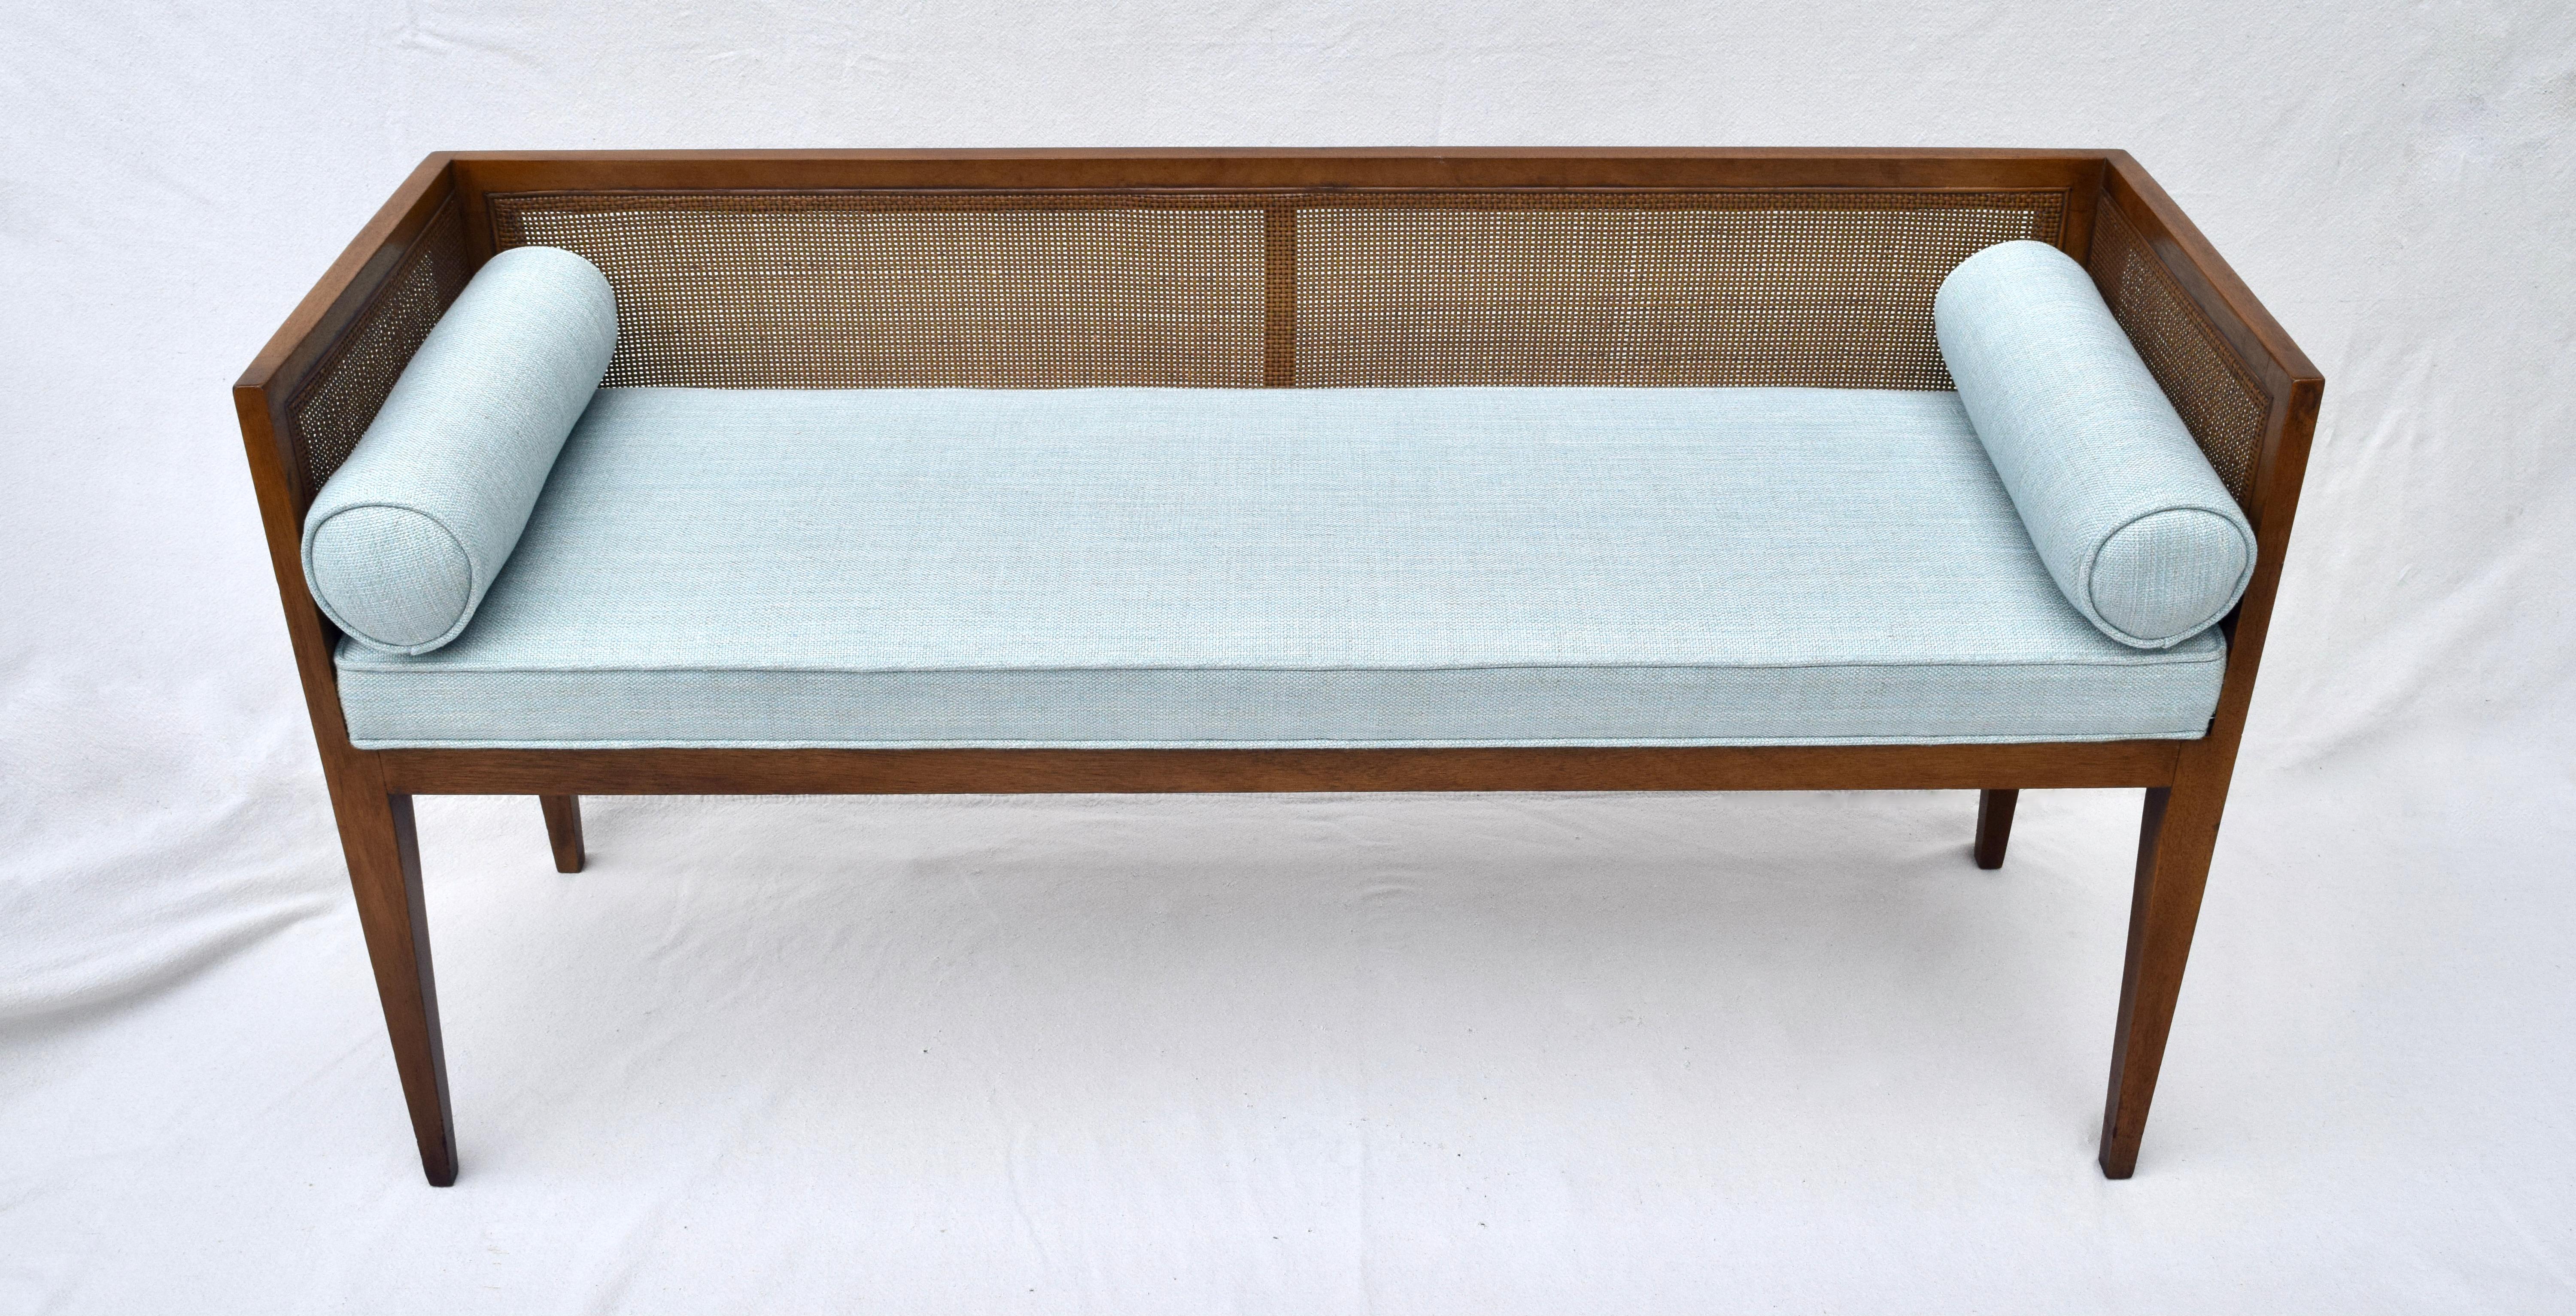 Solid walnut Mid-Century Modern window bench or settee attributed to Edward Wormley for Dunbar. Lithe line design constructed of walnut frame with original fine scale caning. Fully detailed original finish. New restored seat and bolster cushions are